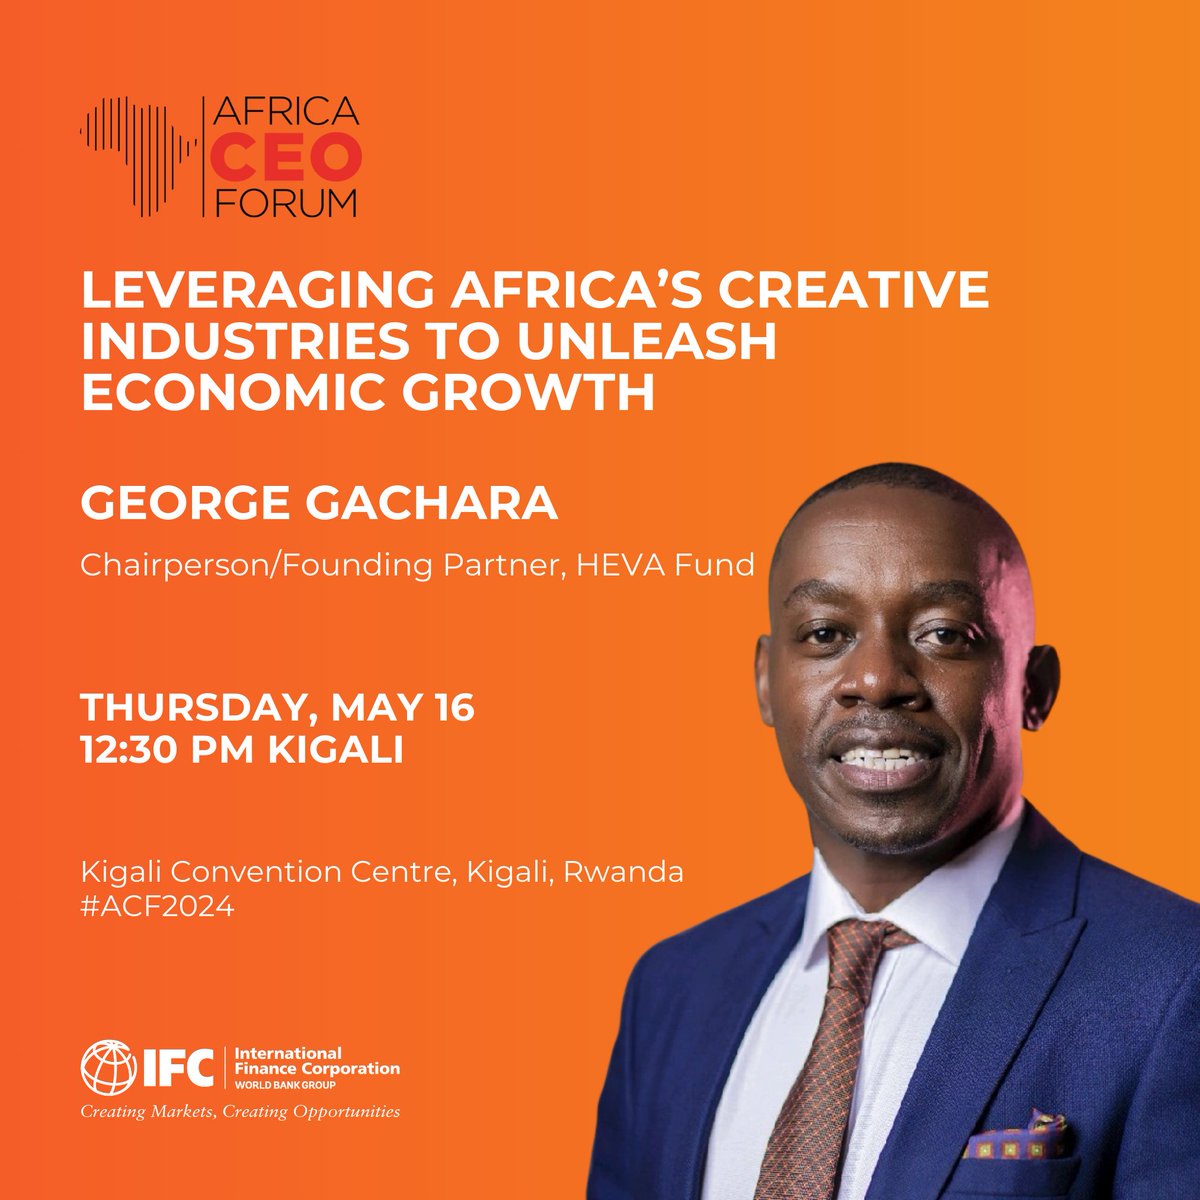 Africa’s creative industries presents an opportunity to drive growth & expand economic opportunities for the continent. Excited to be speaking at the #CreativeIndustries roundtable during the #AfricaCEOForum by @IFCAfrica  in #Kigali on 16th May. #ACF2024 wrld.bg/5ftF50QUekp